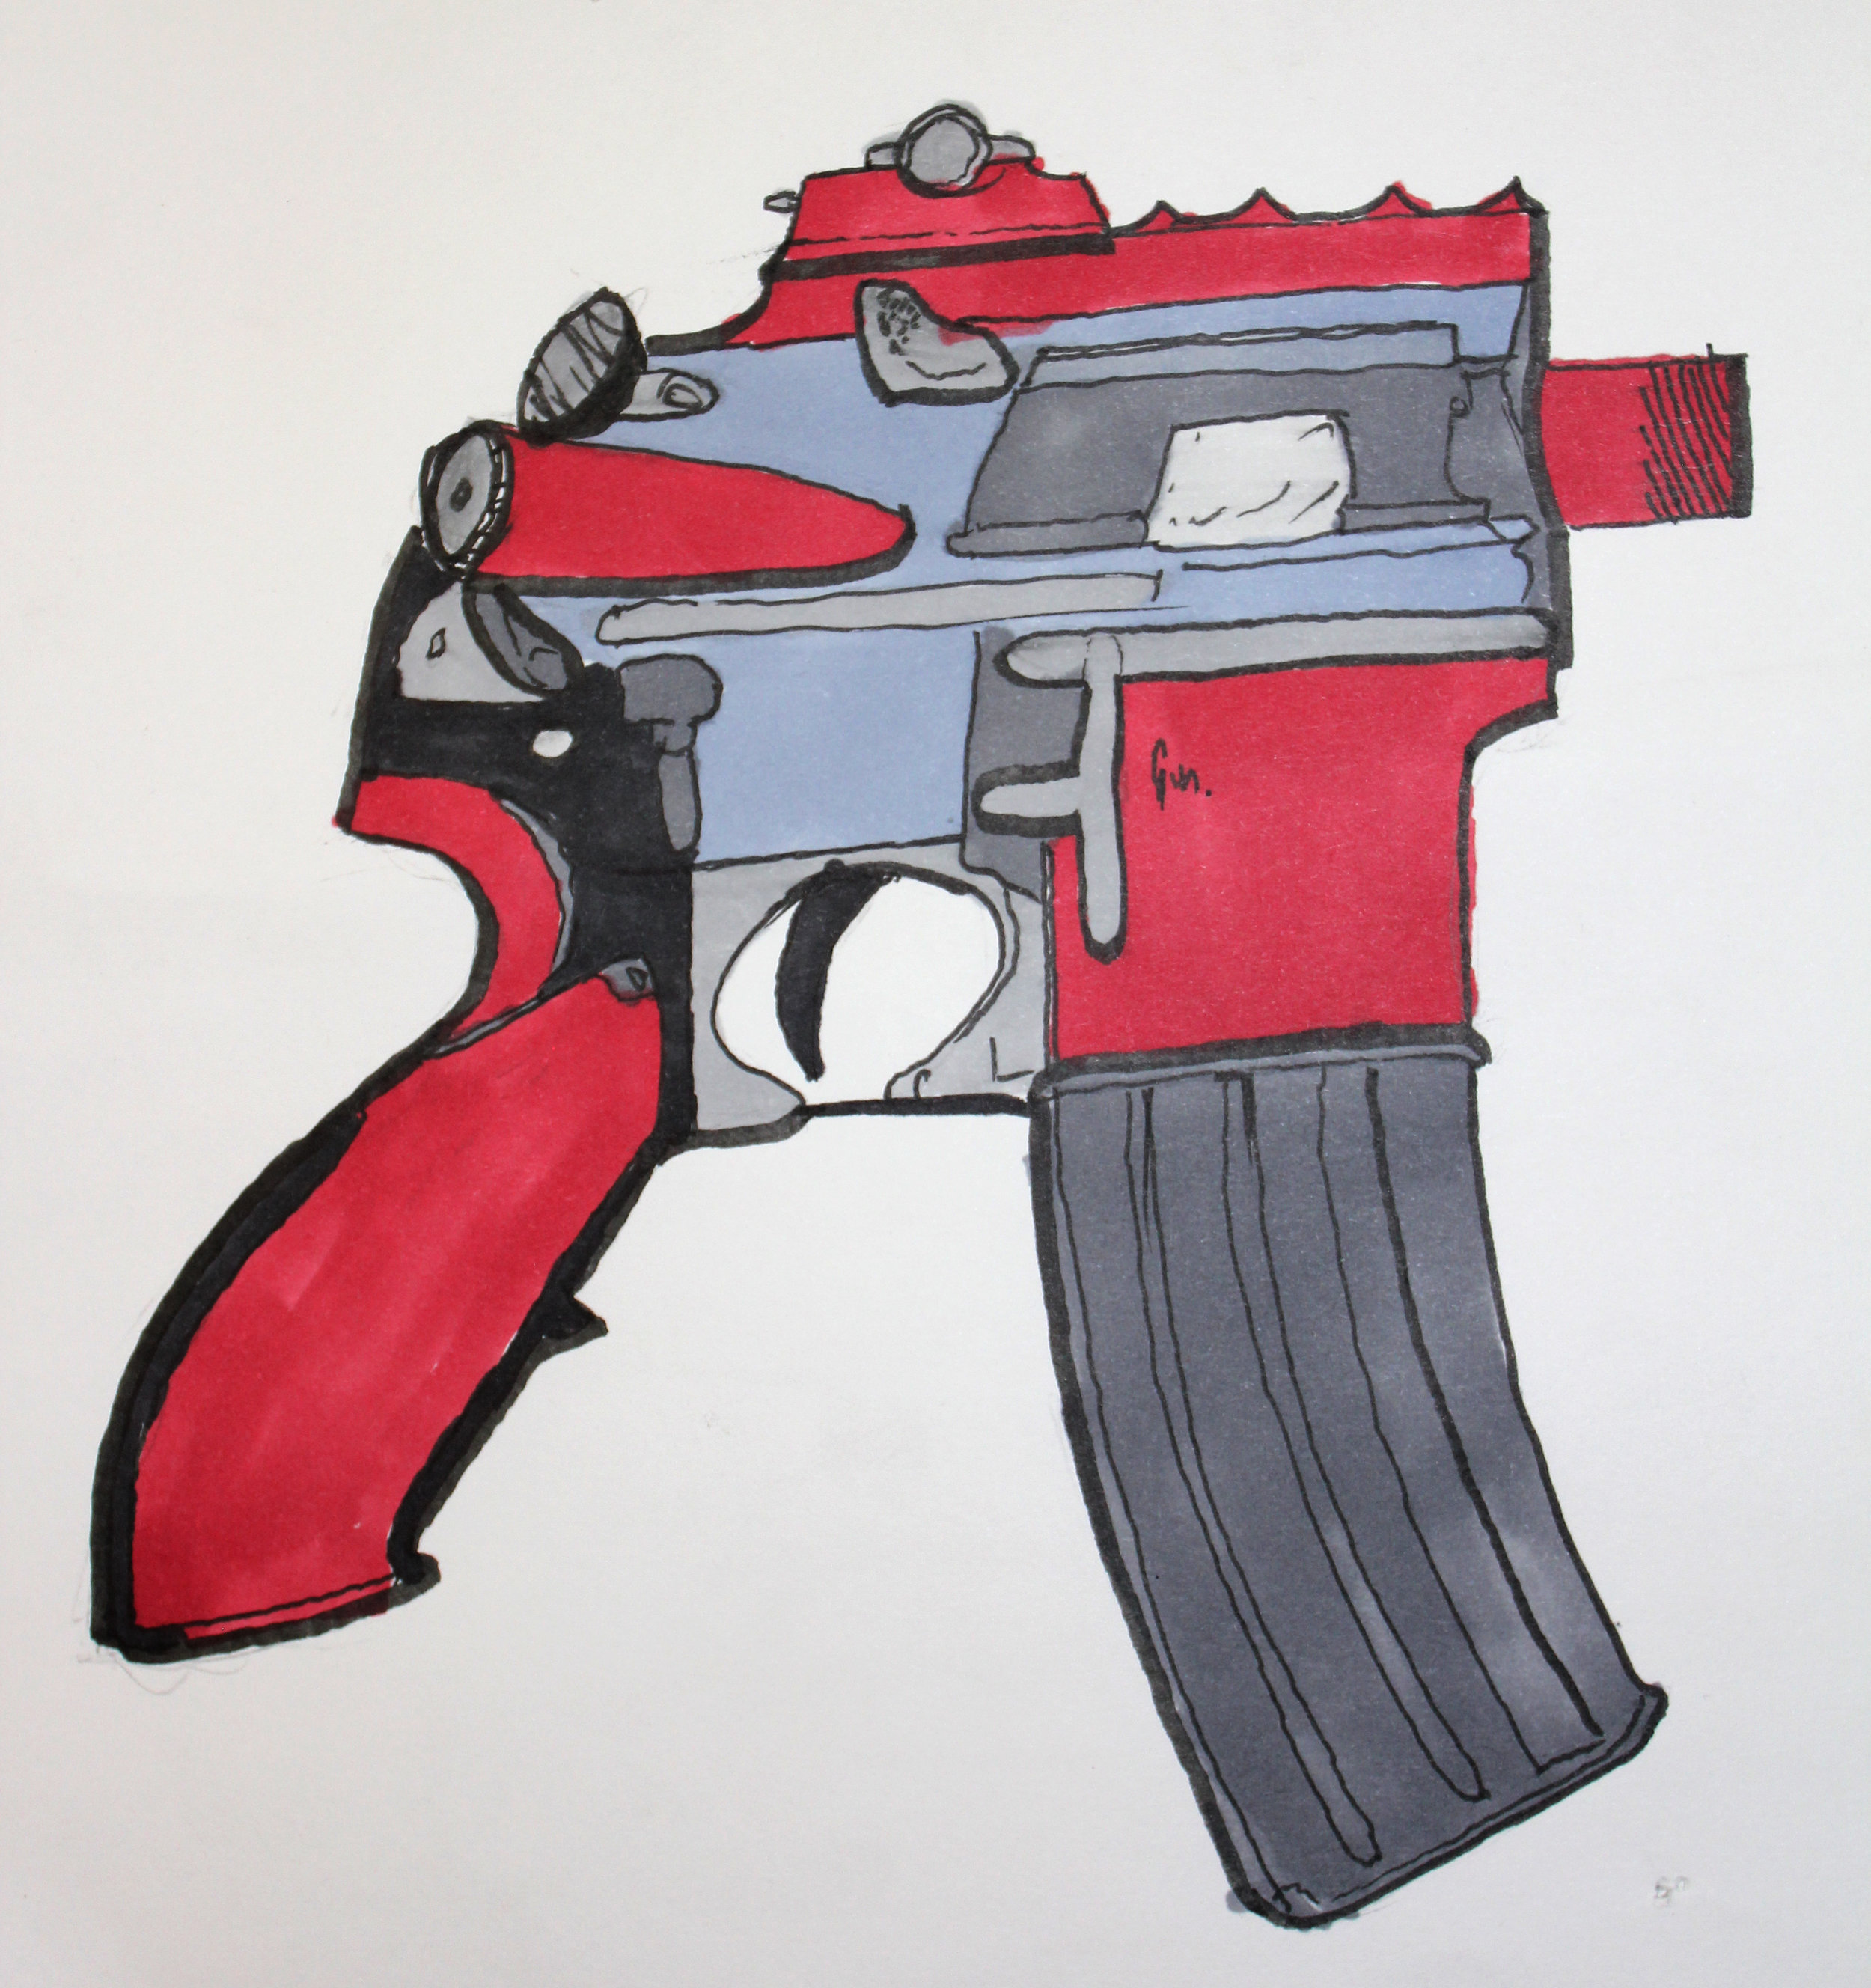  Machine pistol concept.  Pen and alcohol-based pen on paper 